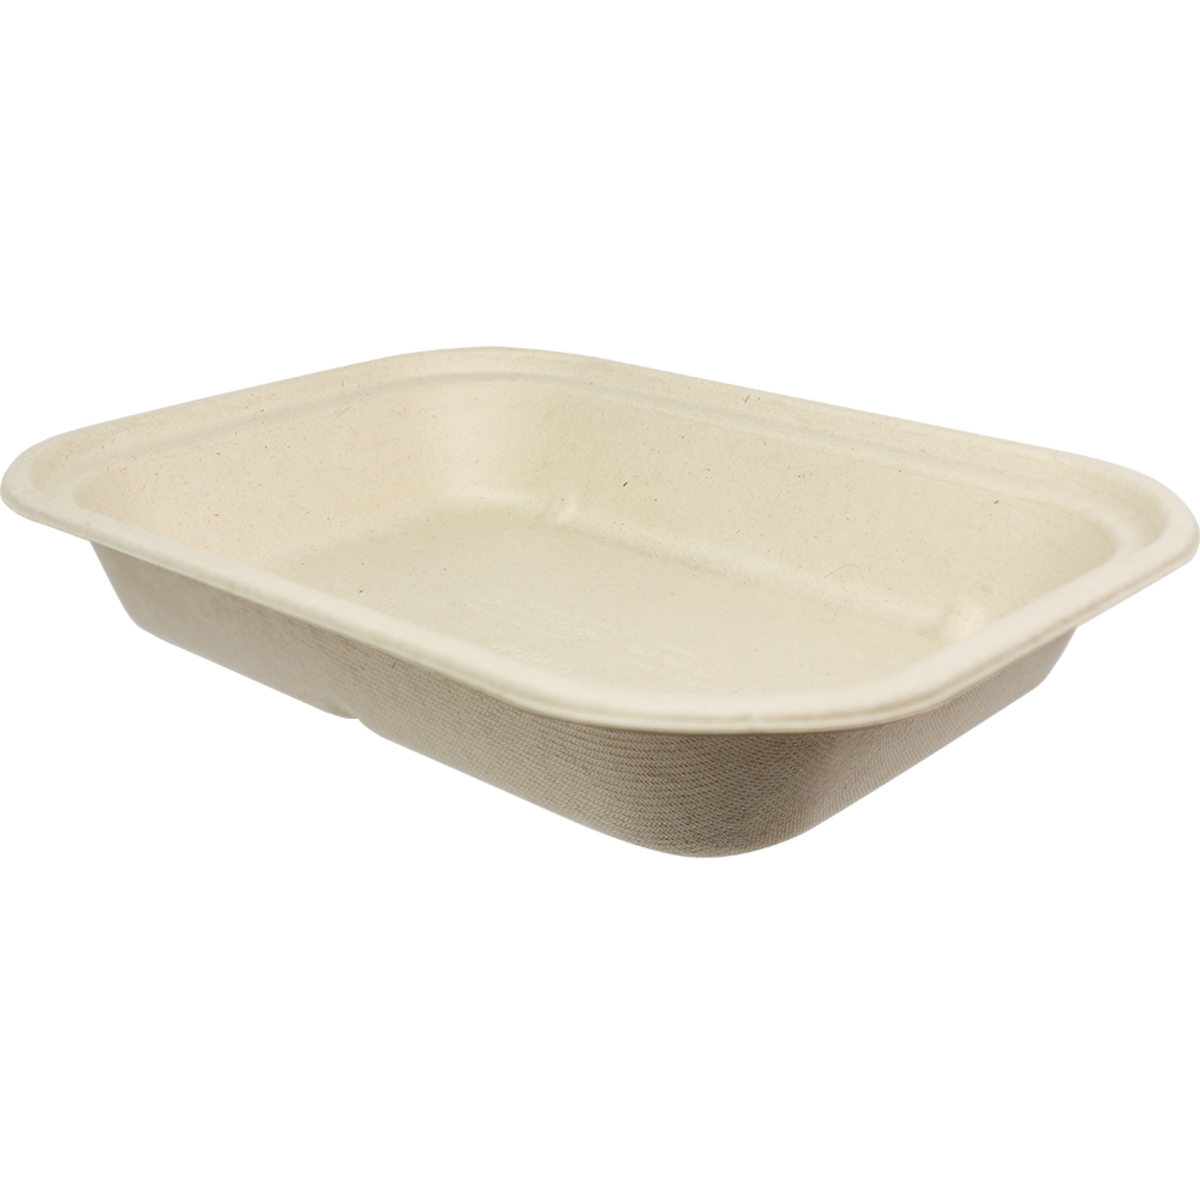 36 oz Fiber To Go Container | 10" x 7.5" x 1.5" | PLA Lined | Compostable